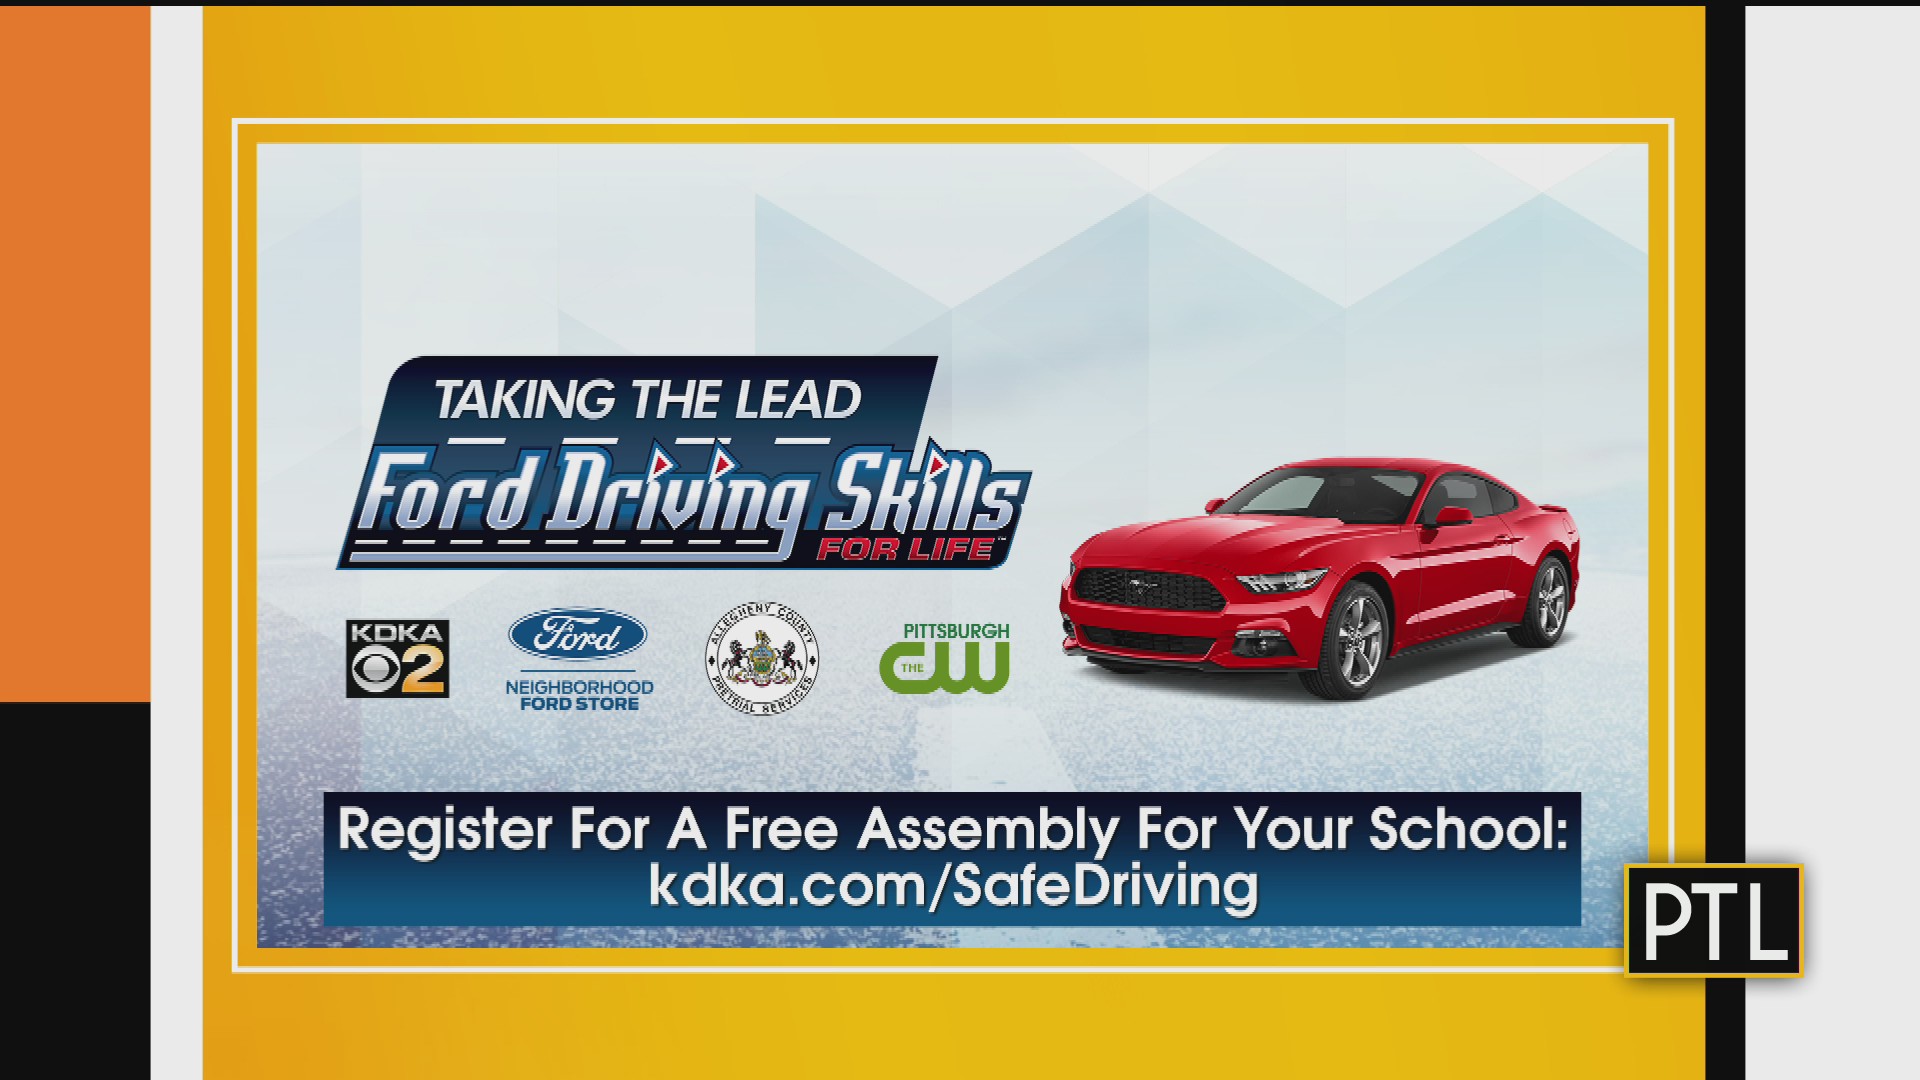 Ford Driving Skills For Life Wraps Up Another Year Of Educating